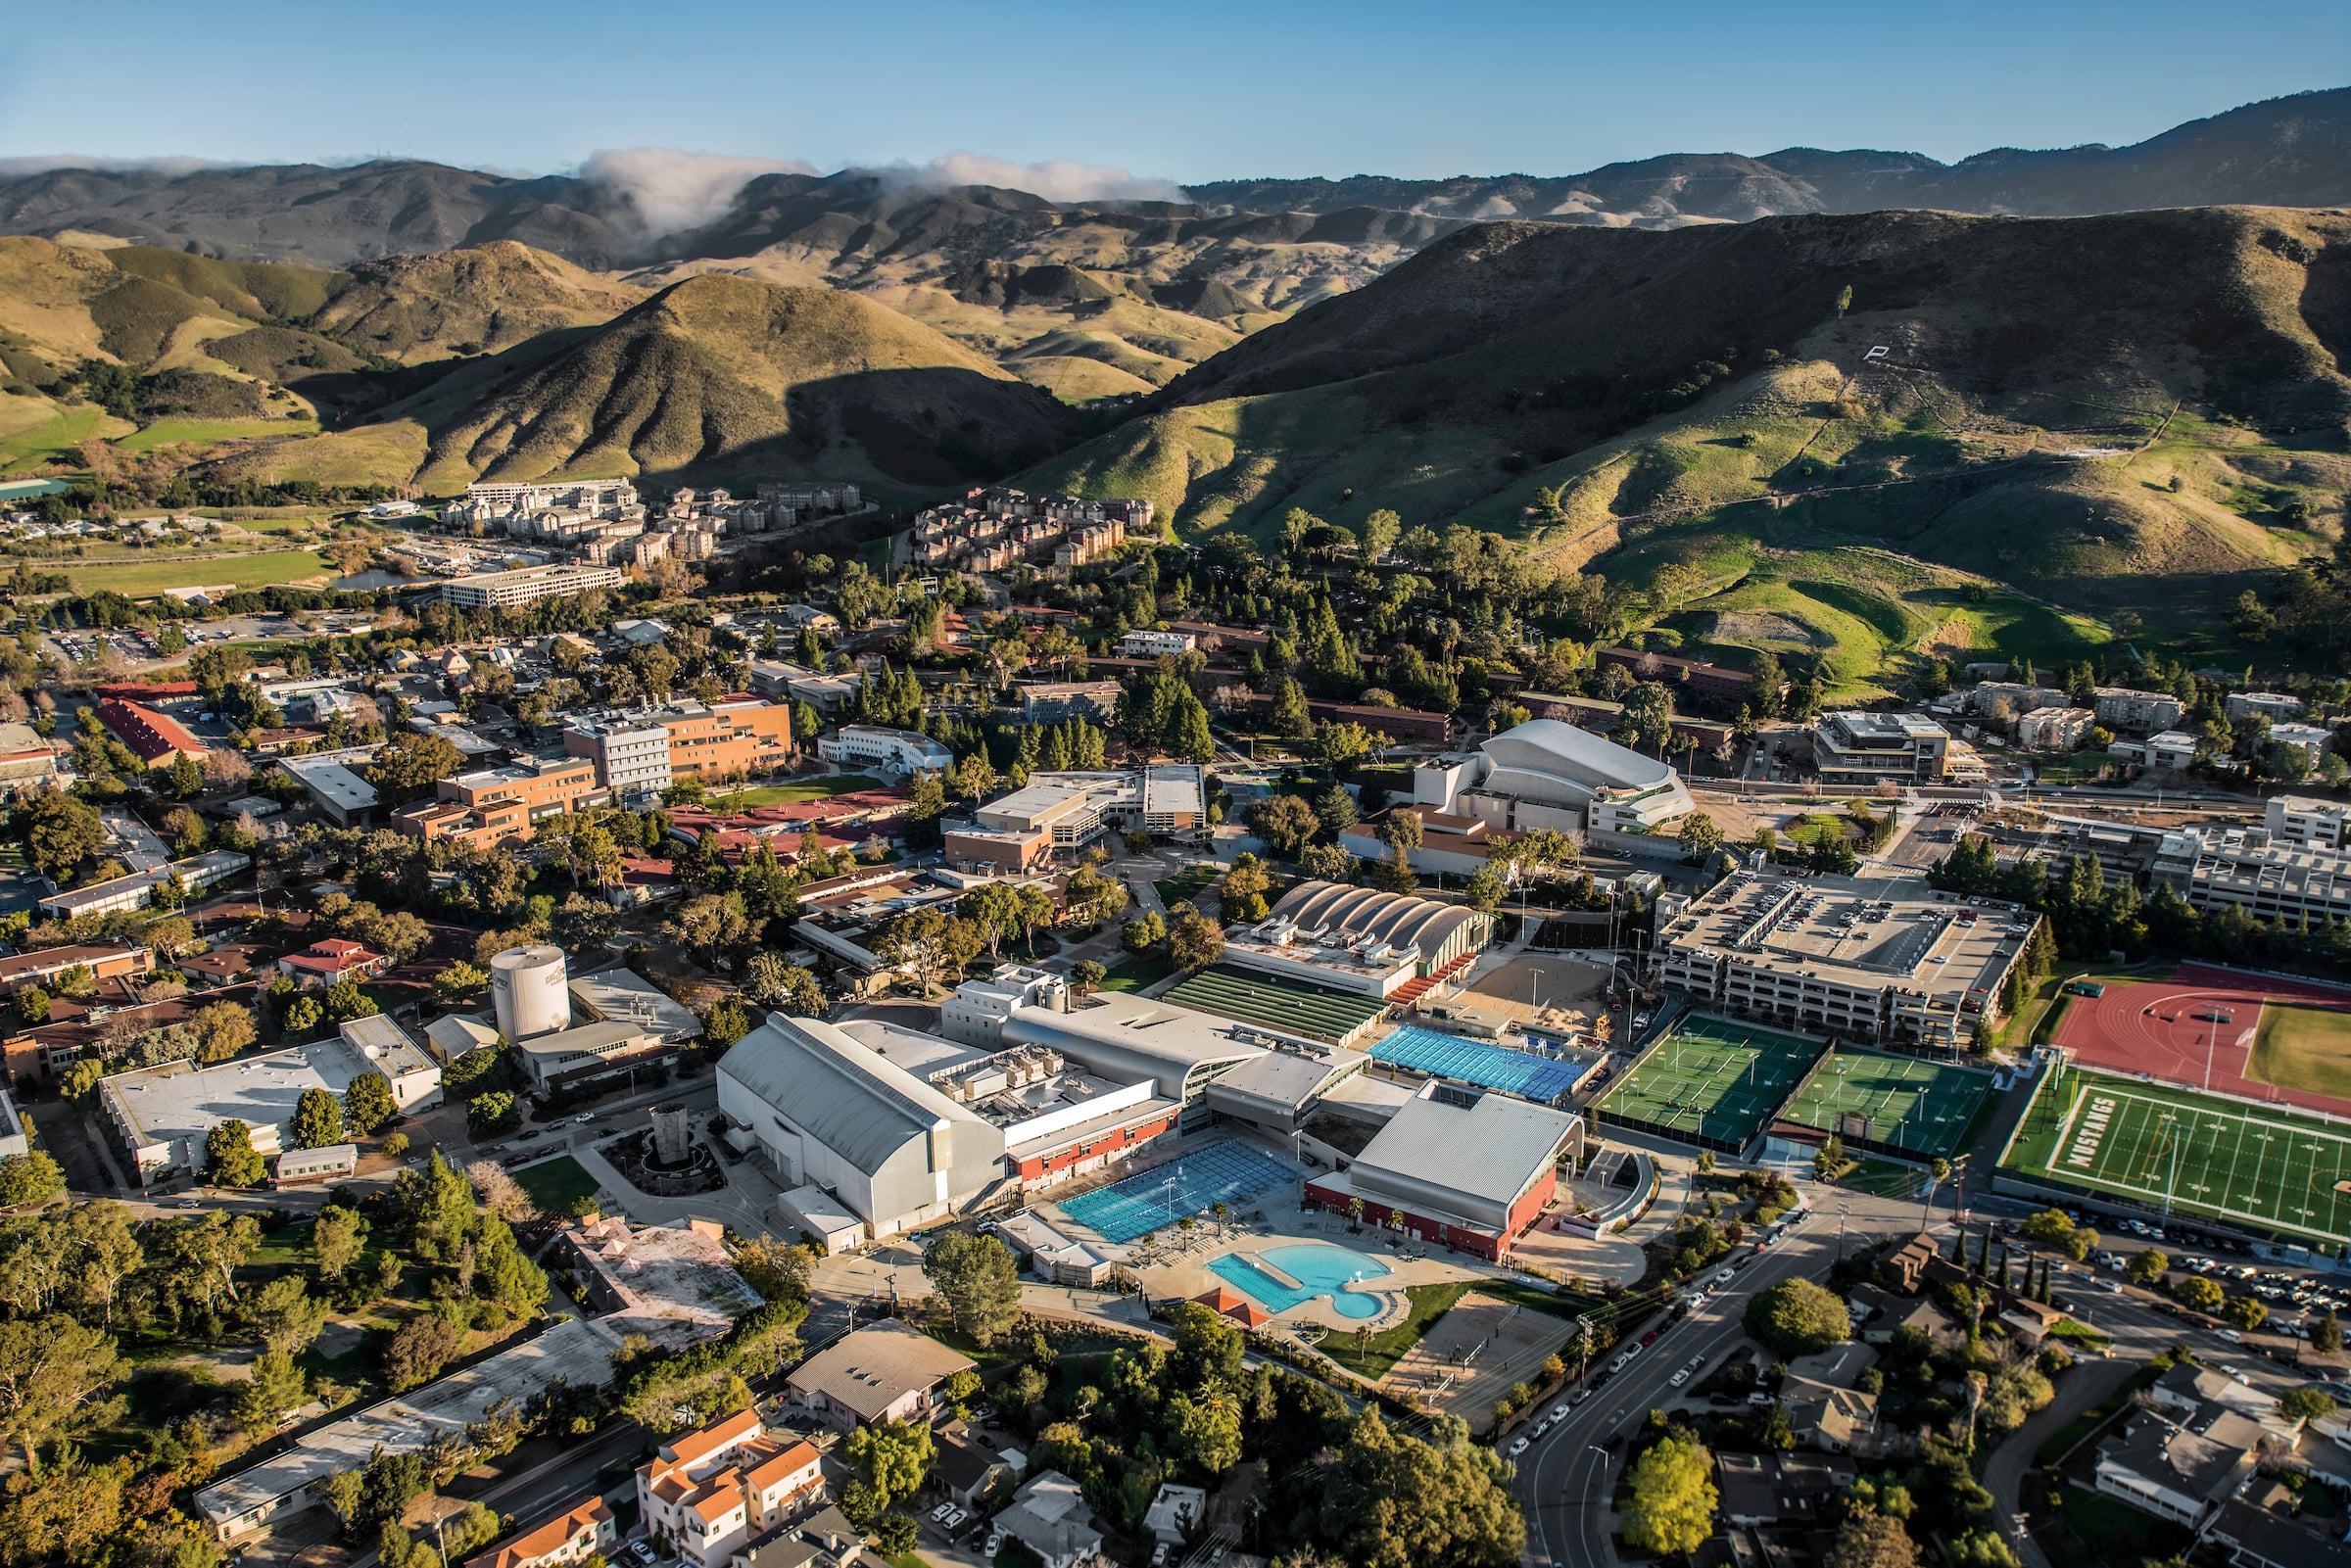 A view overlooking the Cal Poly campus